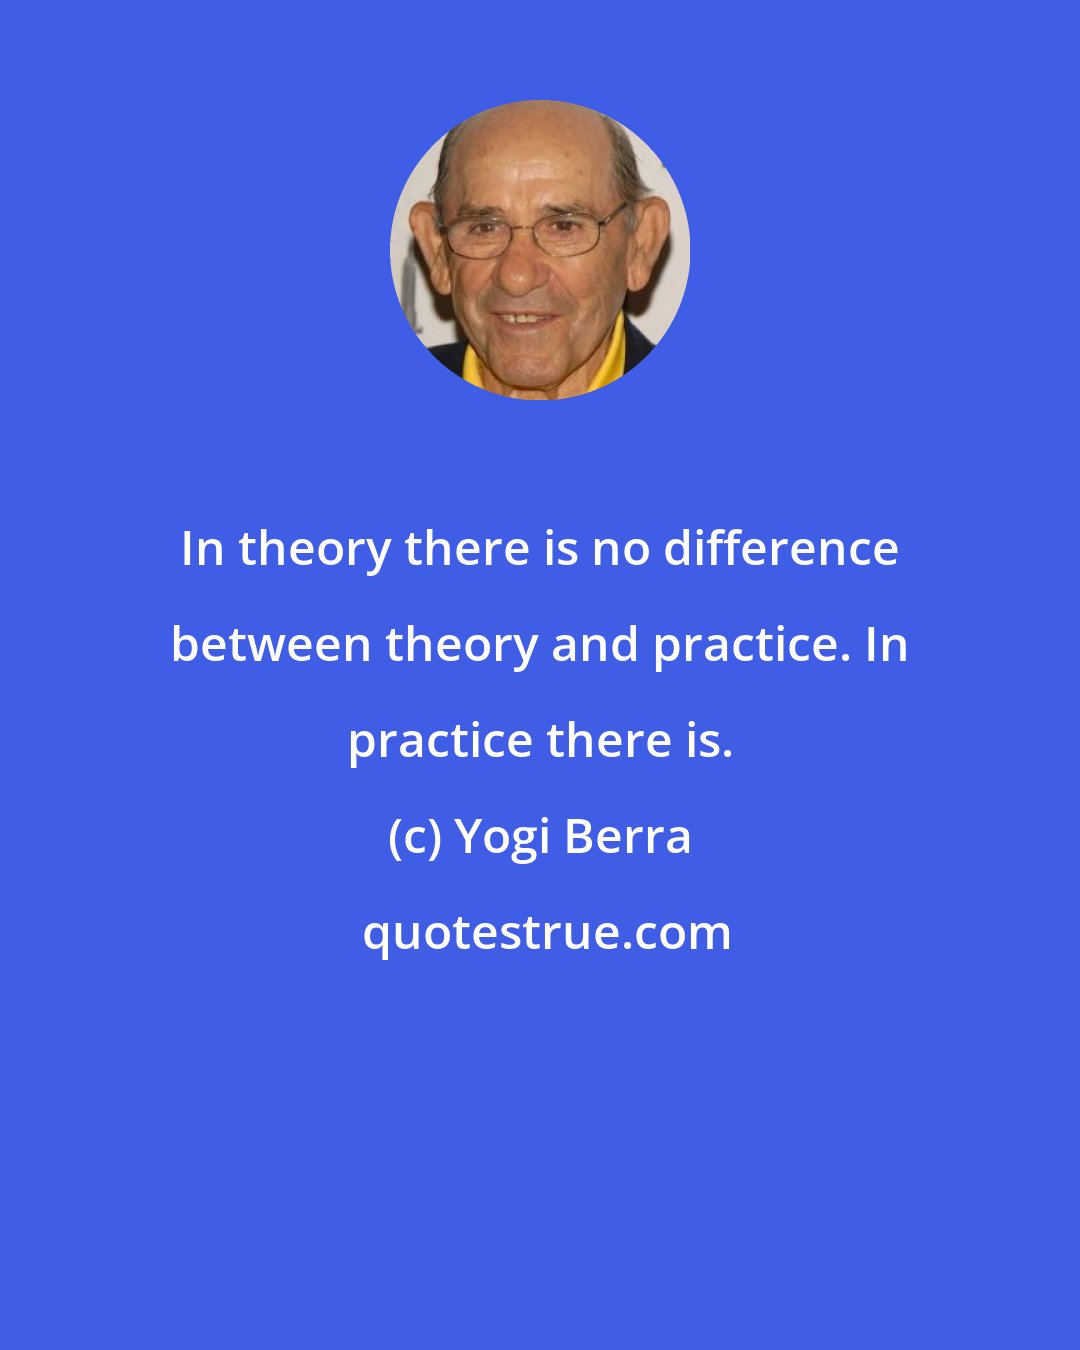 Yogi Berra: In theory there is no difference between theory and practice. In practice there is.